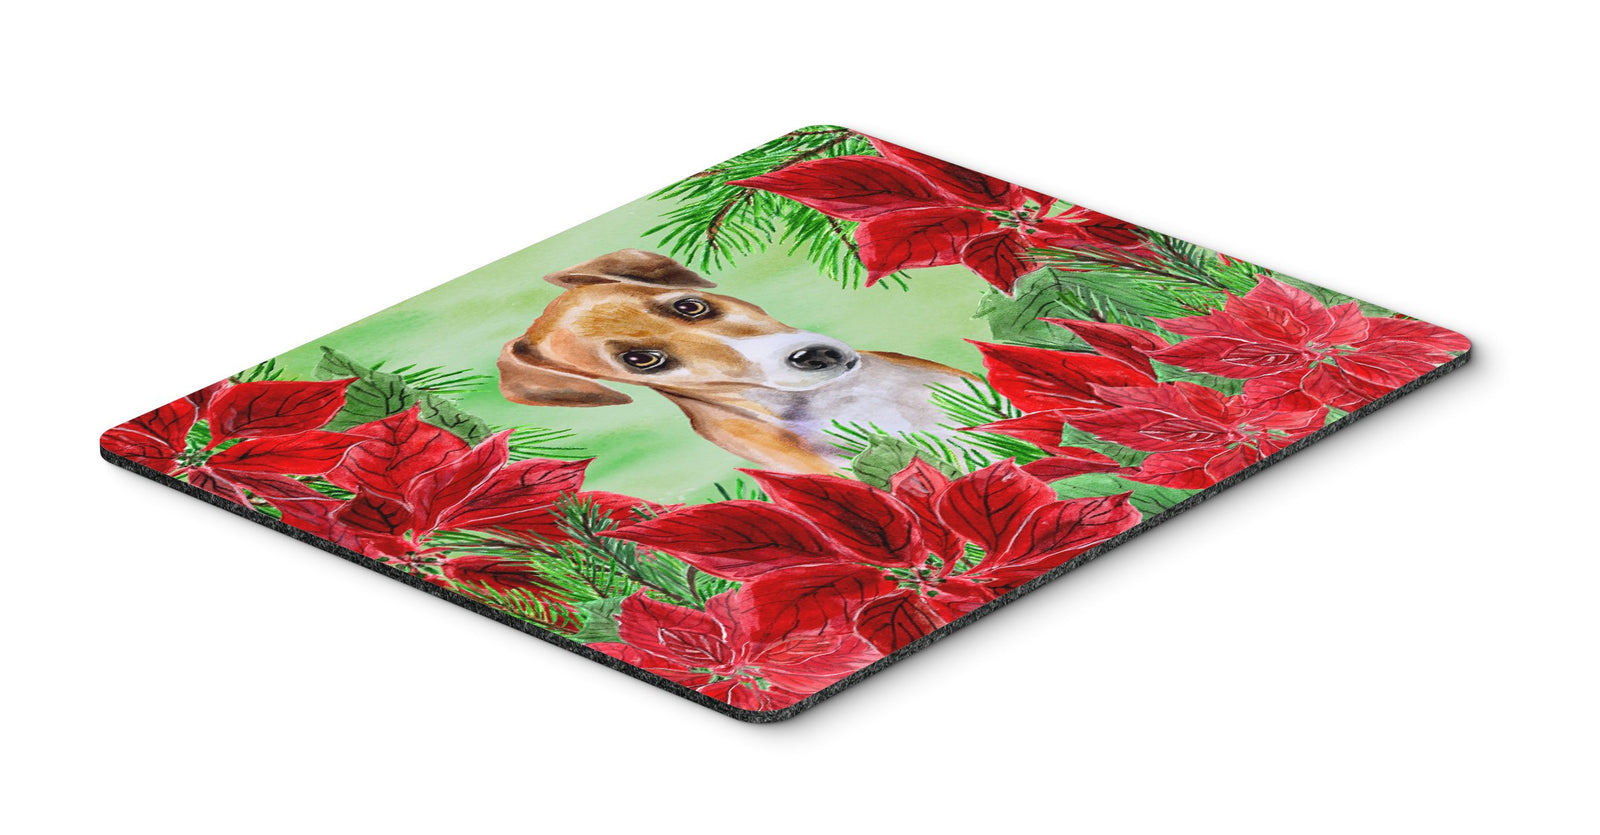 Jack Russell Terrier #2 Poinsettas Mouse Pad, Hot Pad or Trivet CK1360MP by Caroline's Treasures